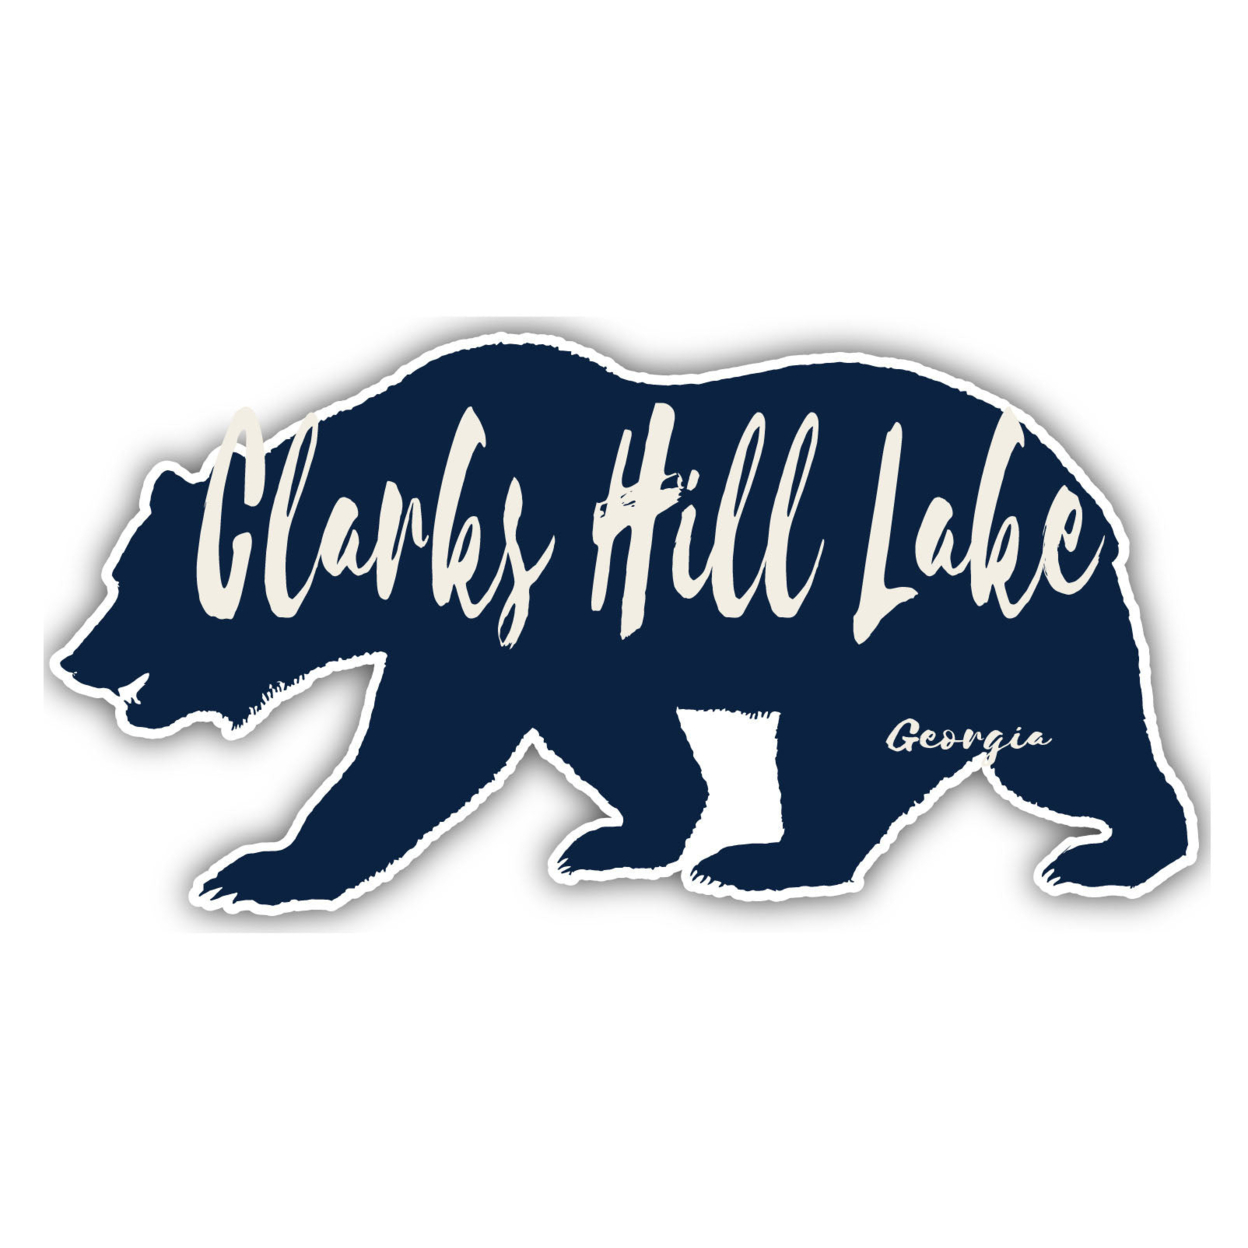 Clarks Hill Lake Georgia Souvenir Decorative Stickers (Choose Theme And Size) - 4-Pack, 10-Inch, Tent